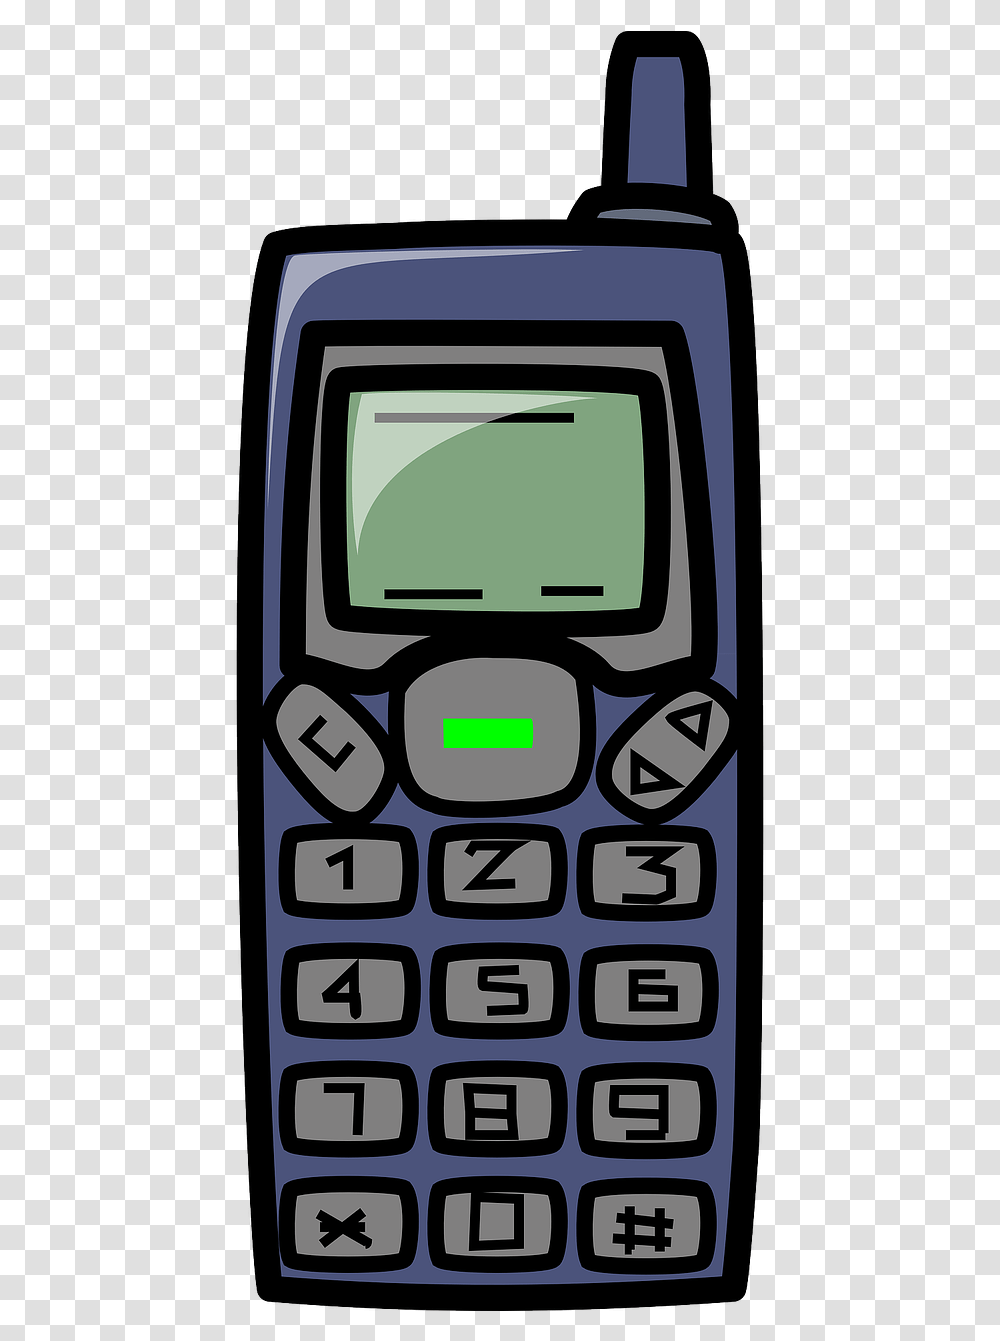 Mobile Phone Cartoon 5 Image Cell Phone Clipart, Electronics, Texting, Hand-Held Computer, GPS Transparent Png